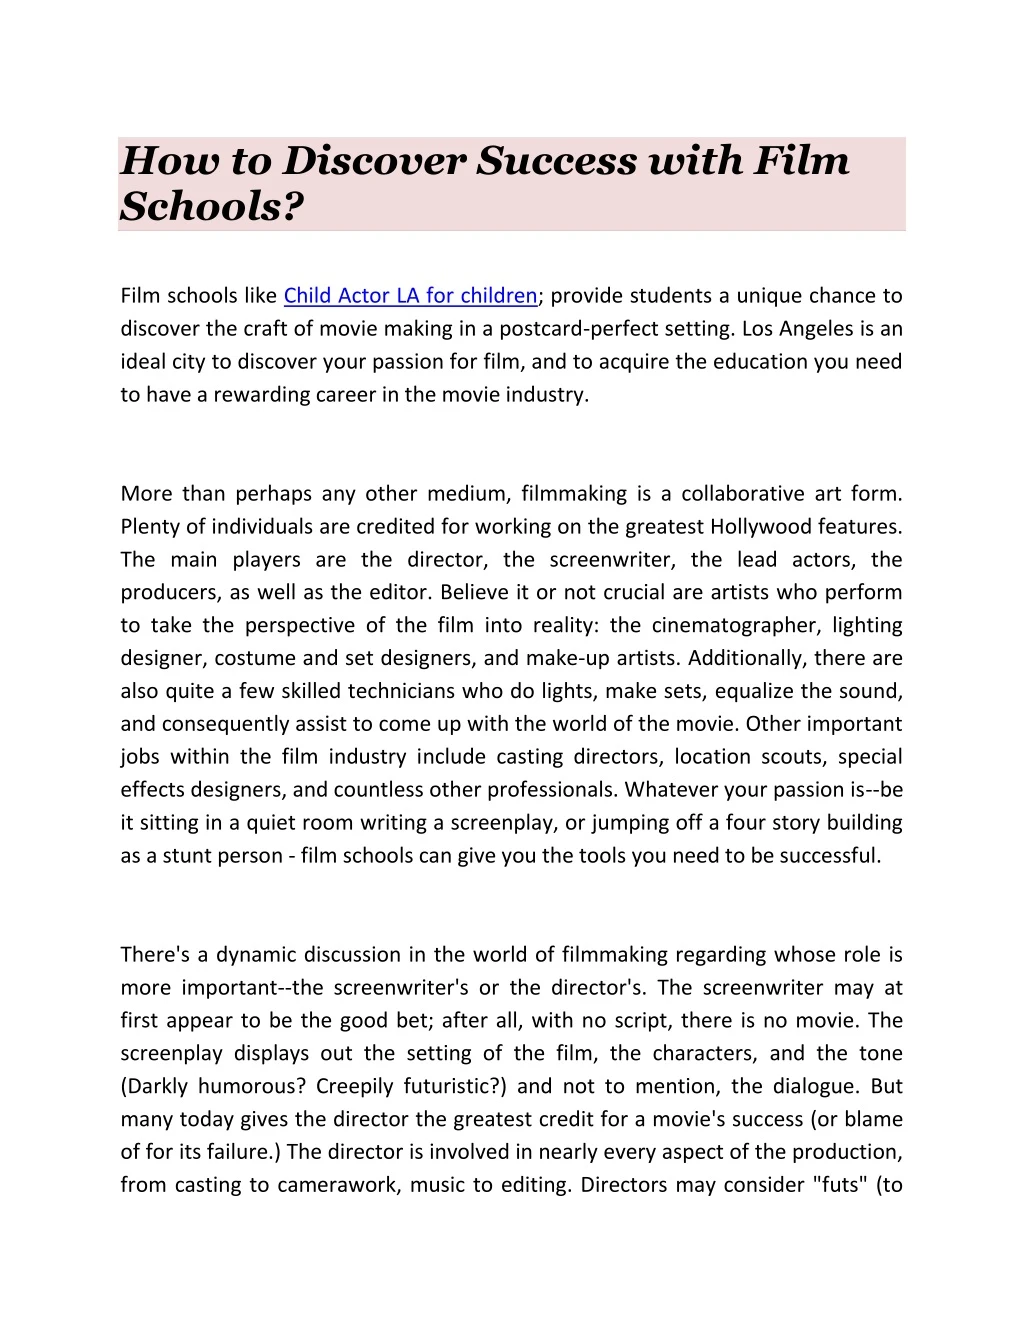 how to discover success with film schools